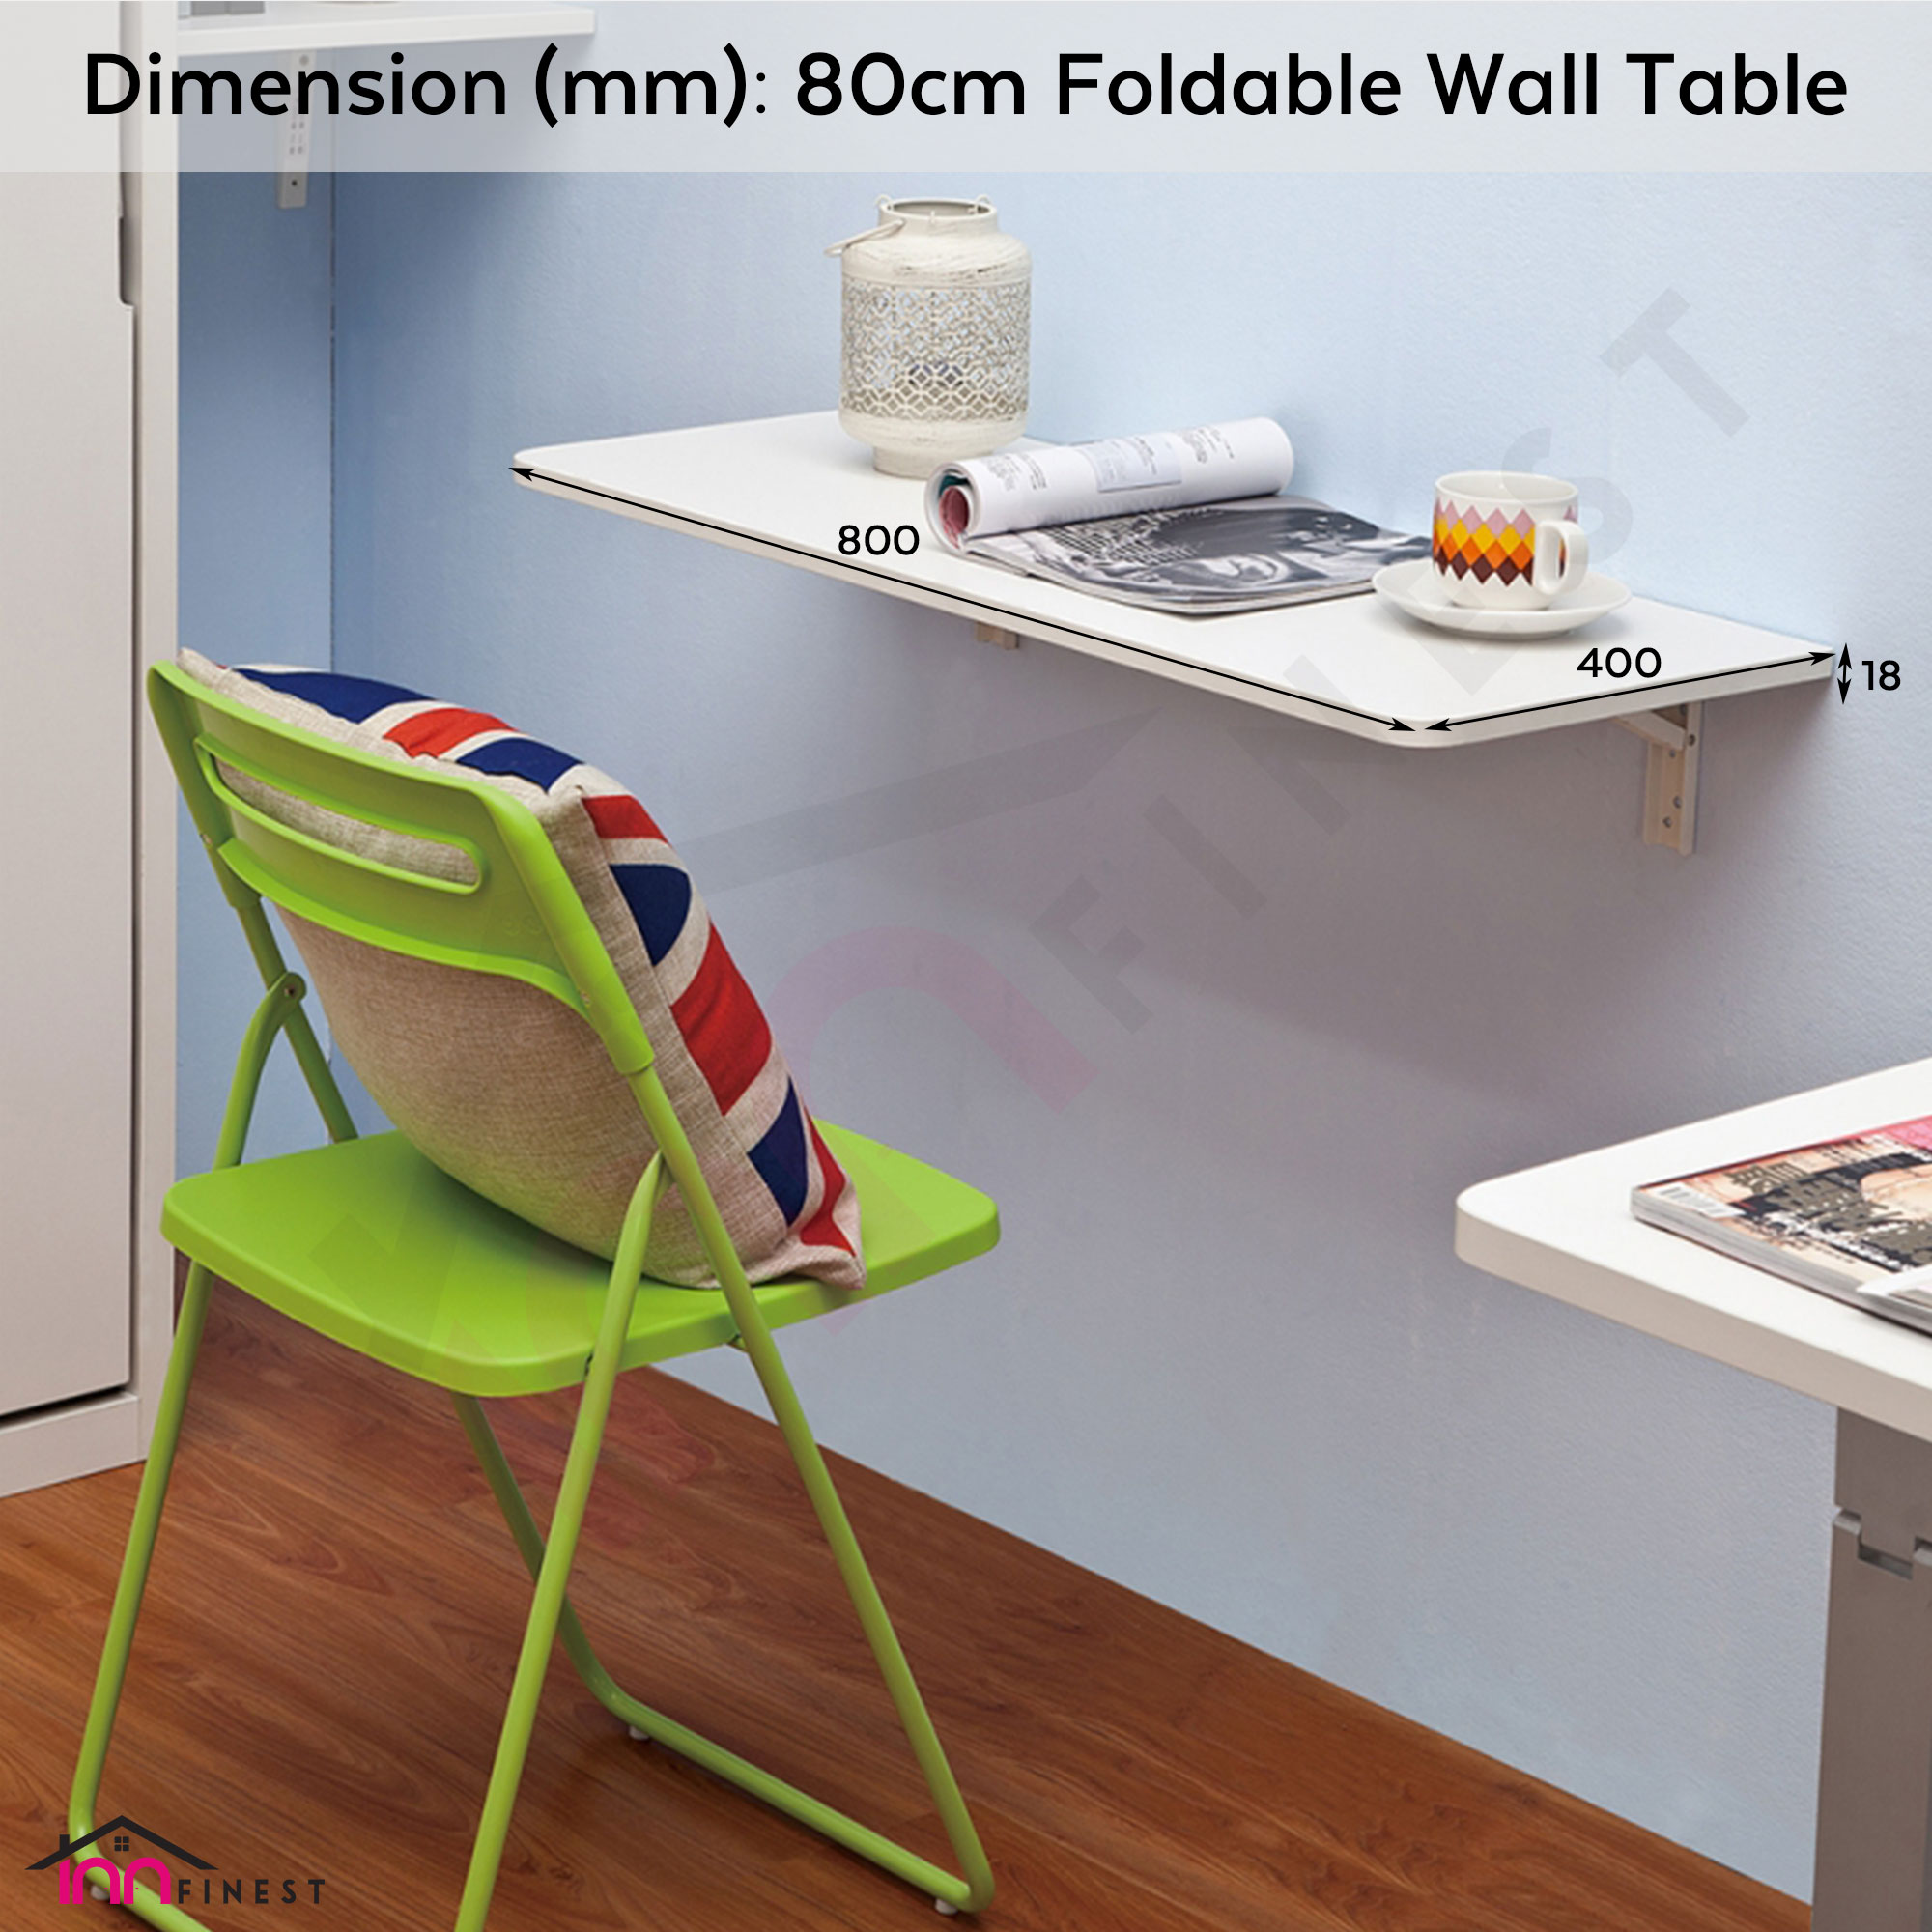 80 cm foldable wall table space saving durable